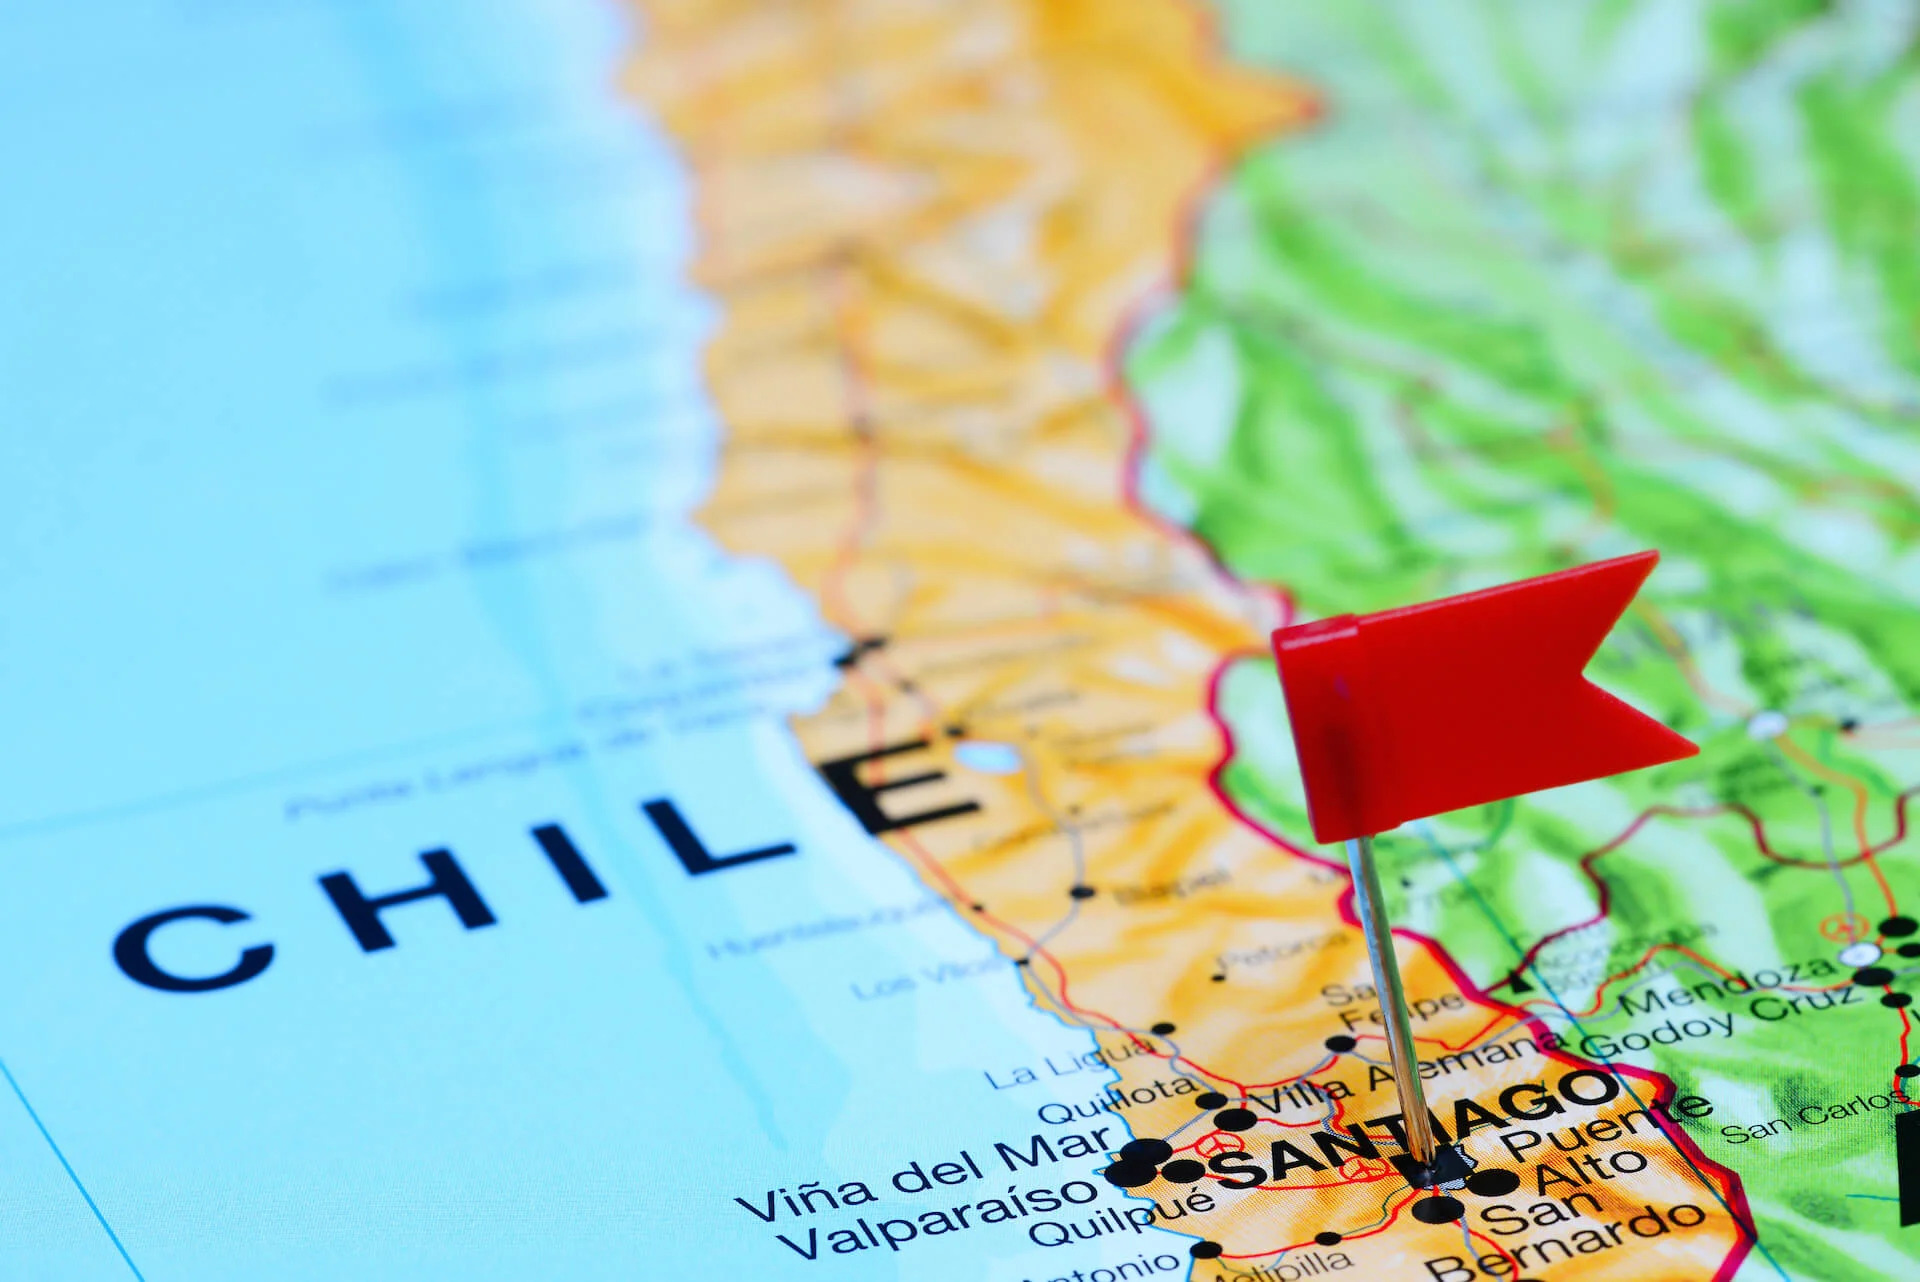 Chile wants to diversify export markets and boost the industrial sector by 2023. (Photo internet reproduction)